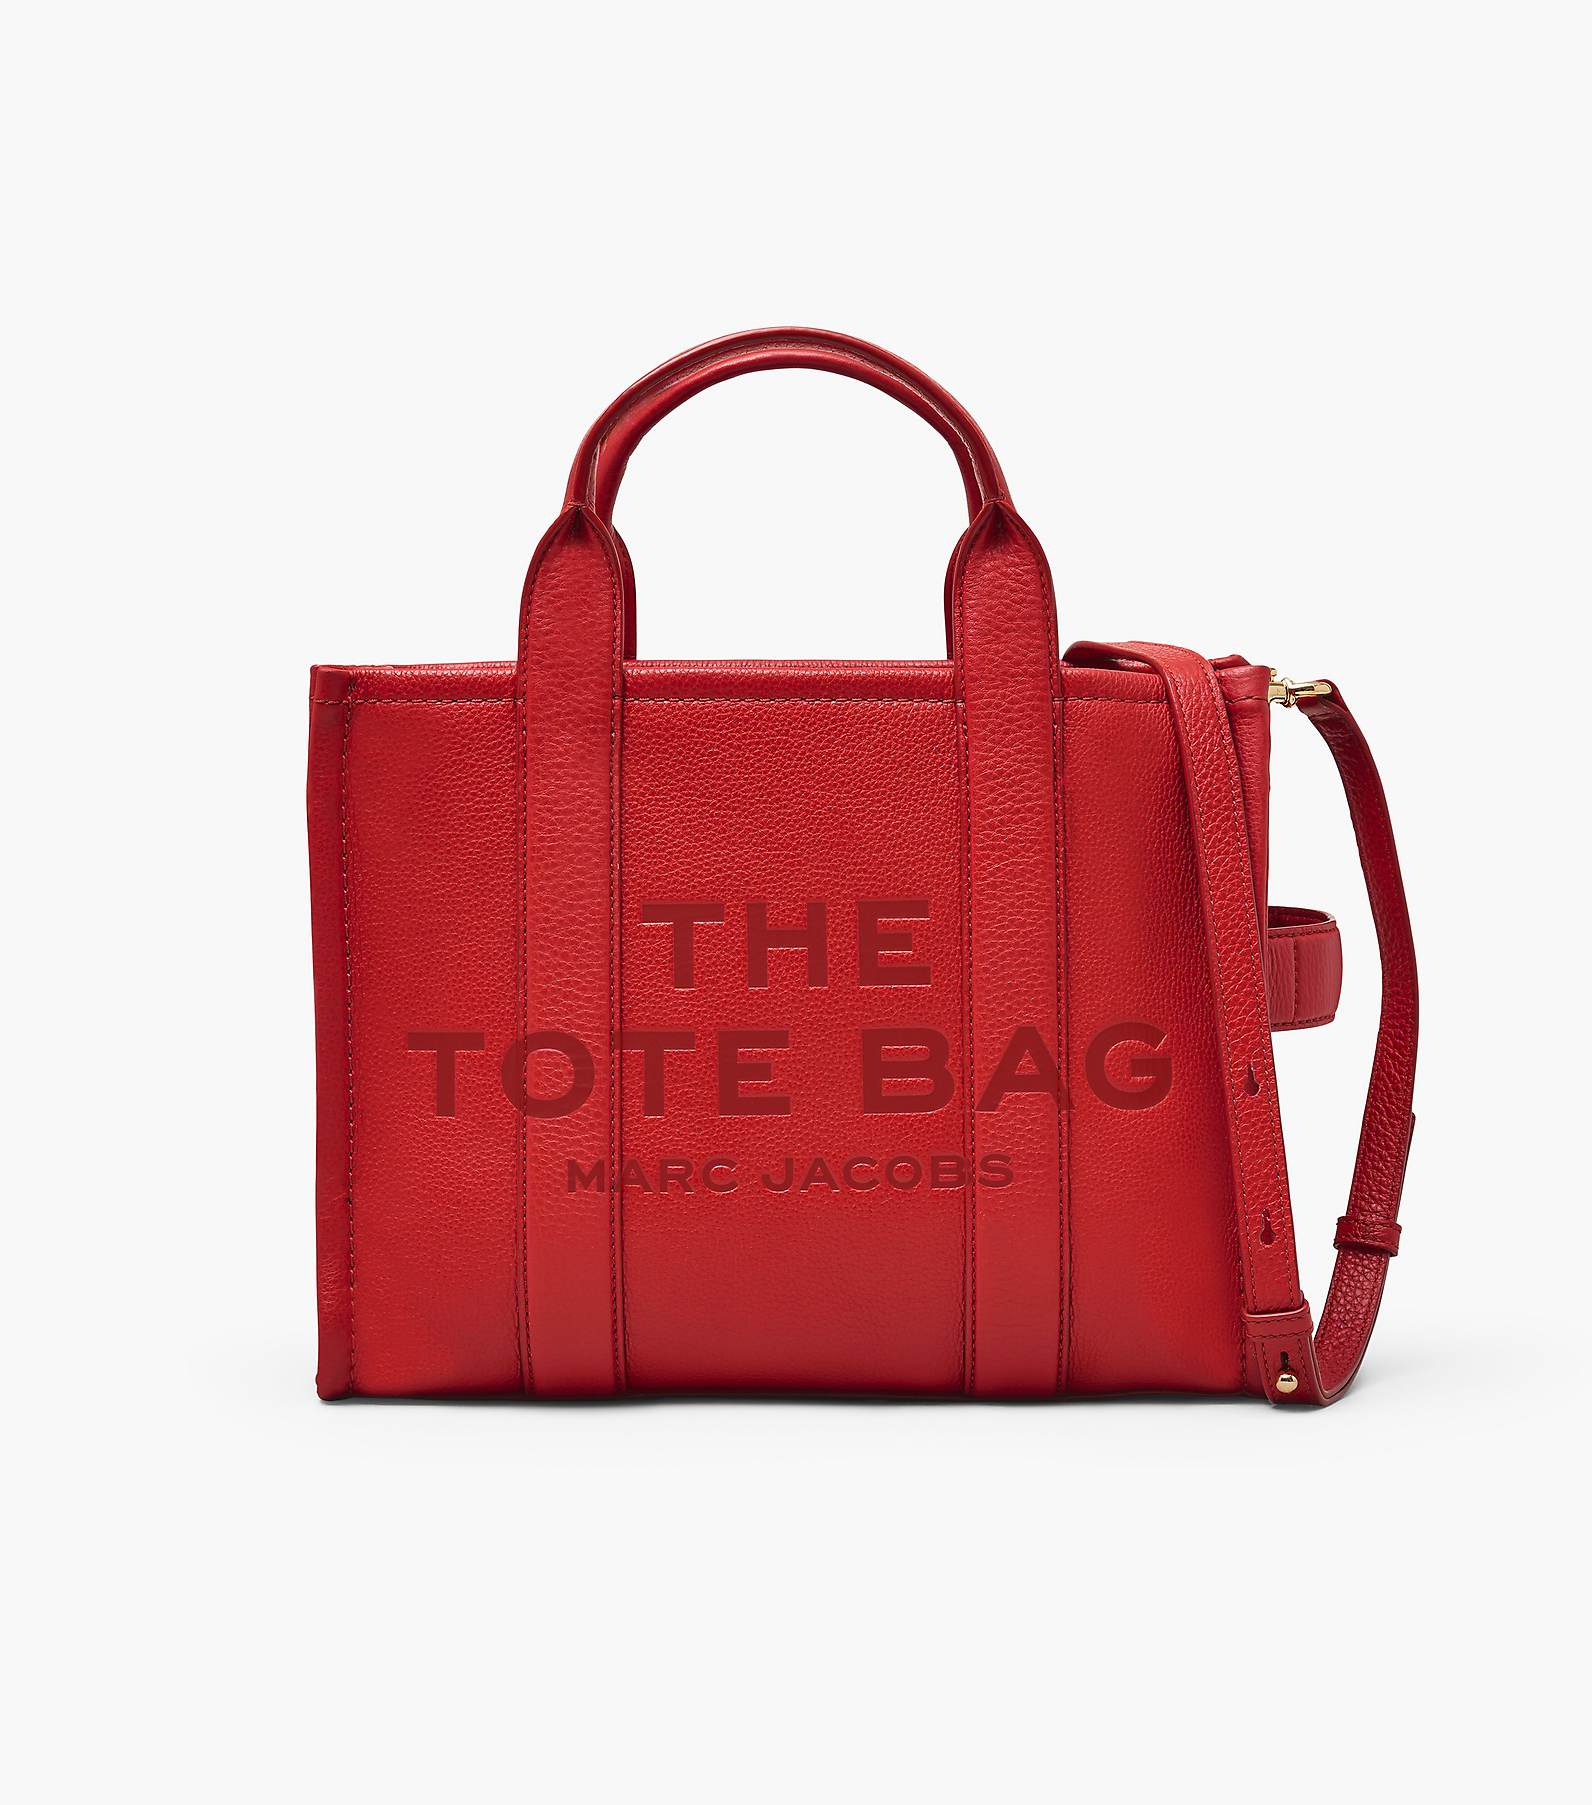 Marc Jacobs - Tote Bag by Marc Jacobs: el complemento perfecto